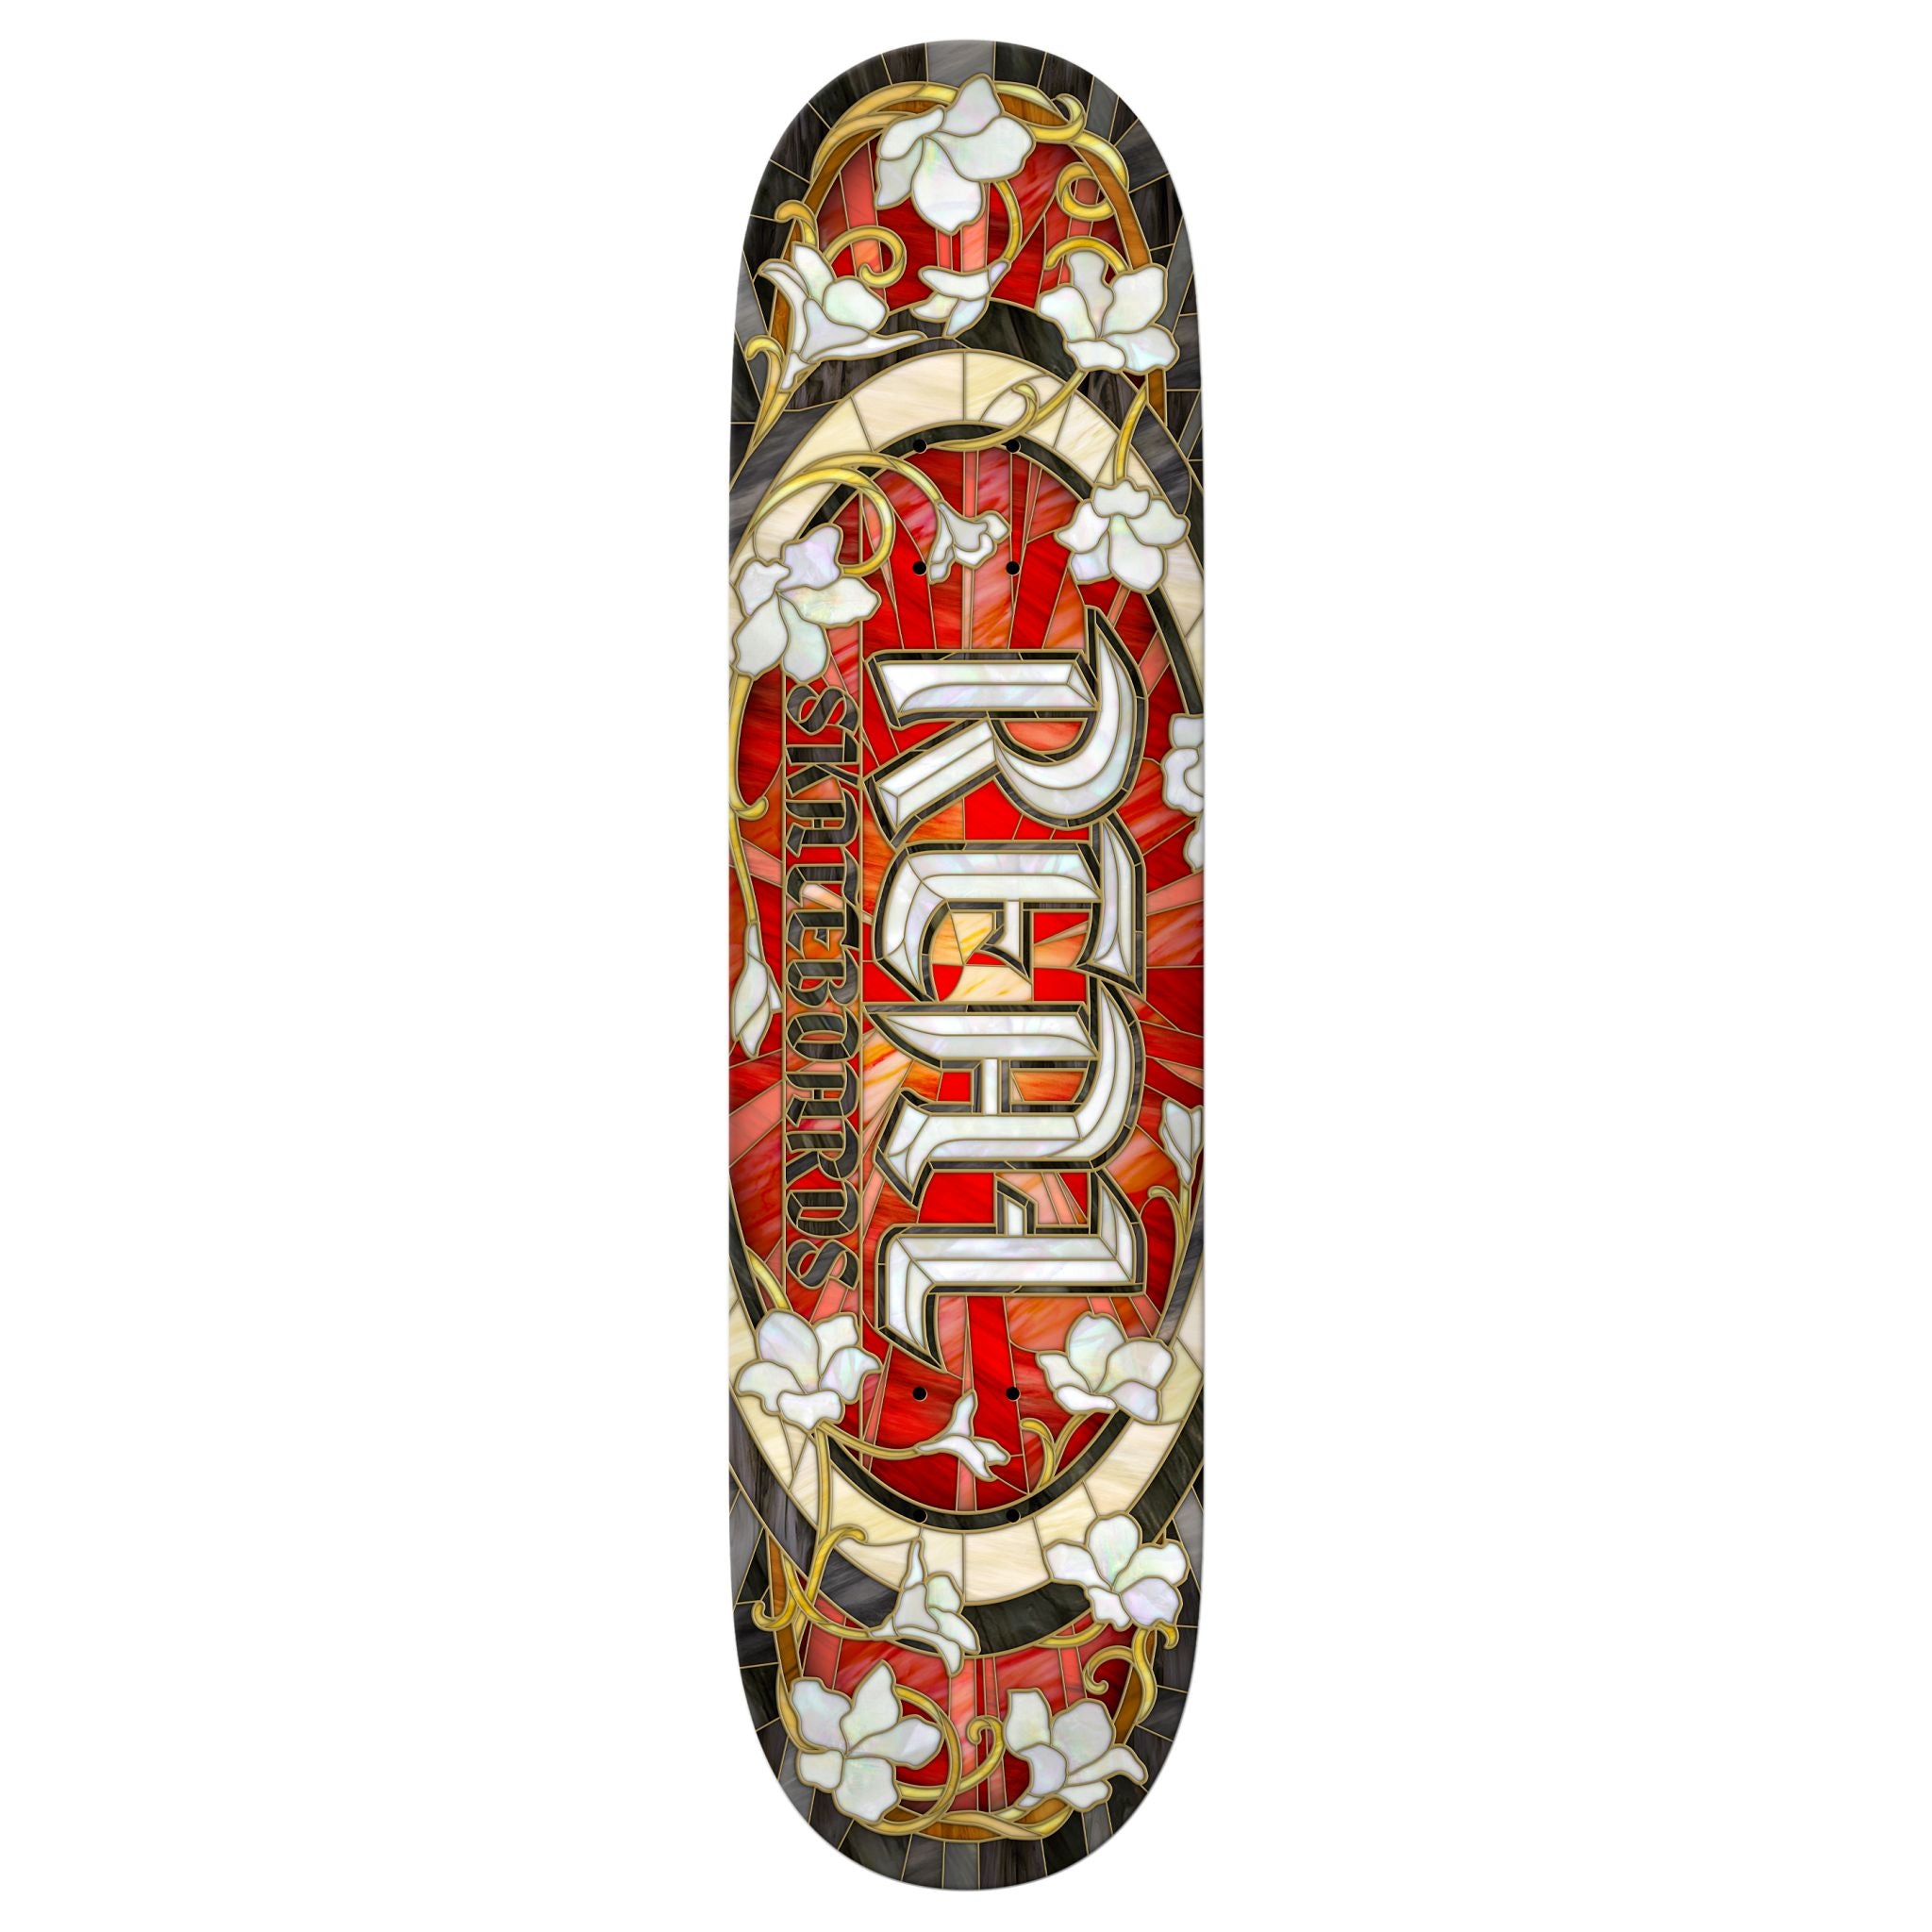 Real Skateboards "Cathedral-Team" Red 8.25" Deck